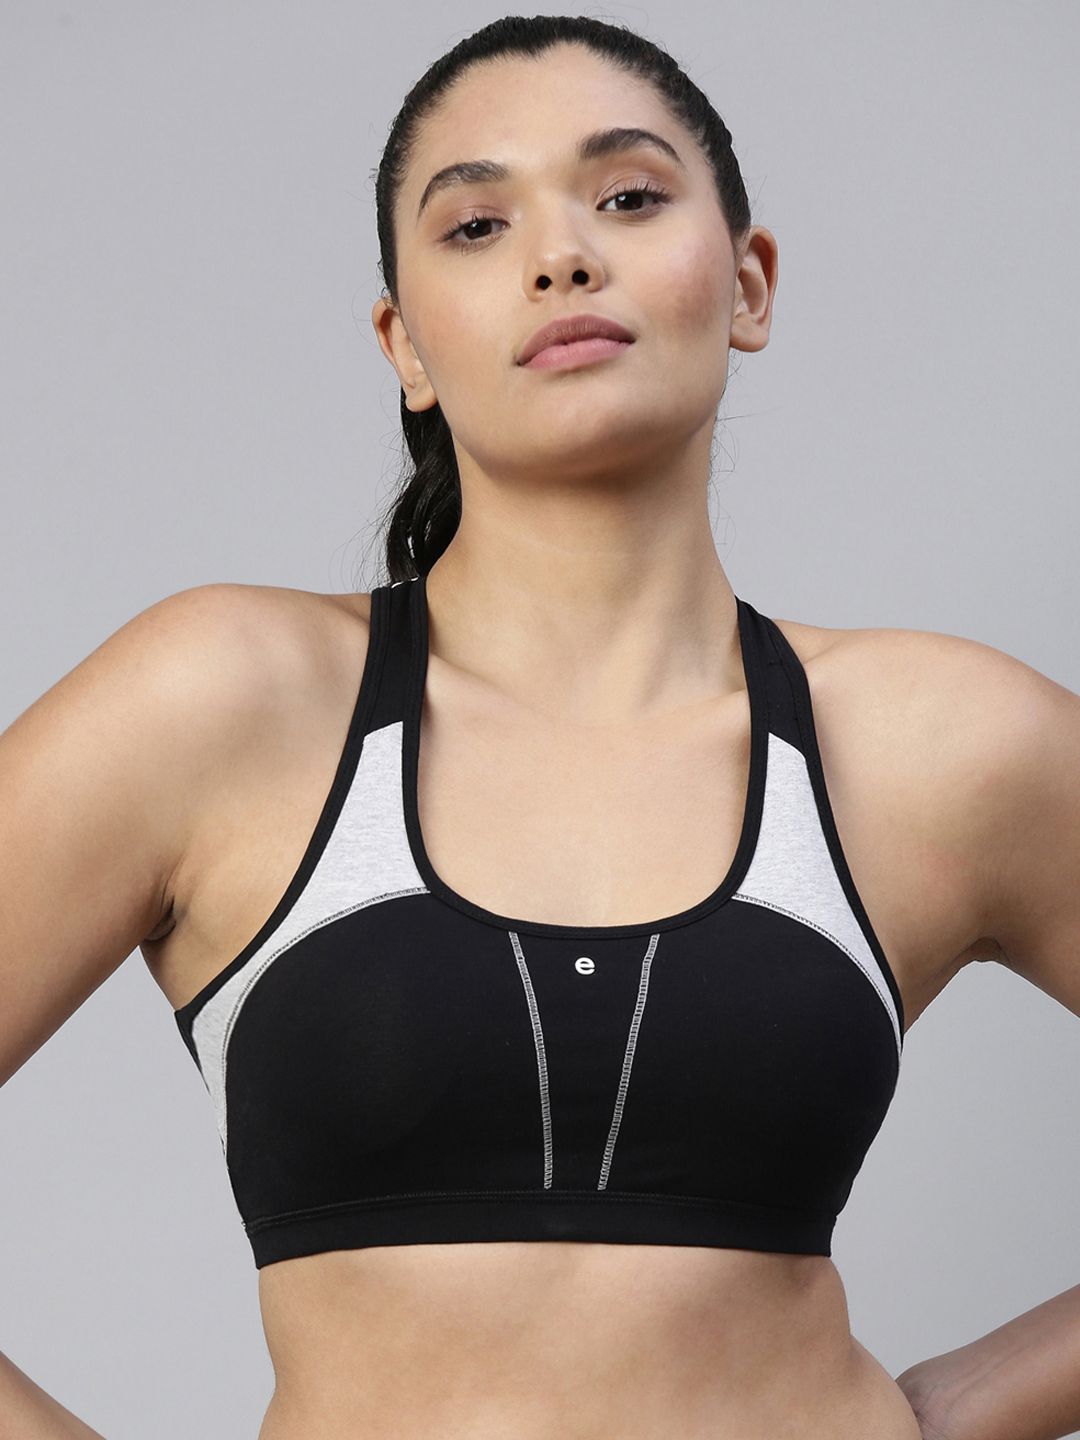 Enamor Black Non-Wired Removable Pads High Coverage Medium Impact Sports Bra SB08 Price in India